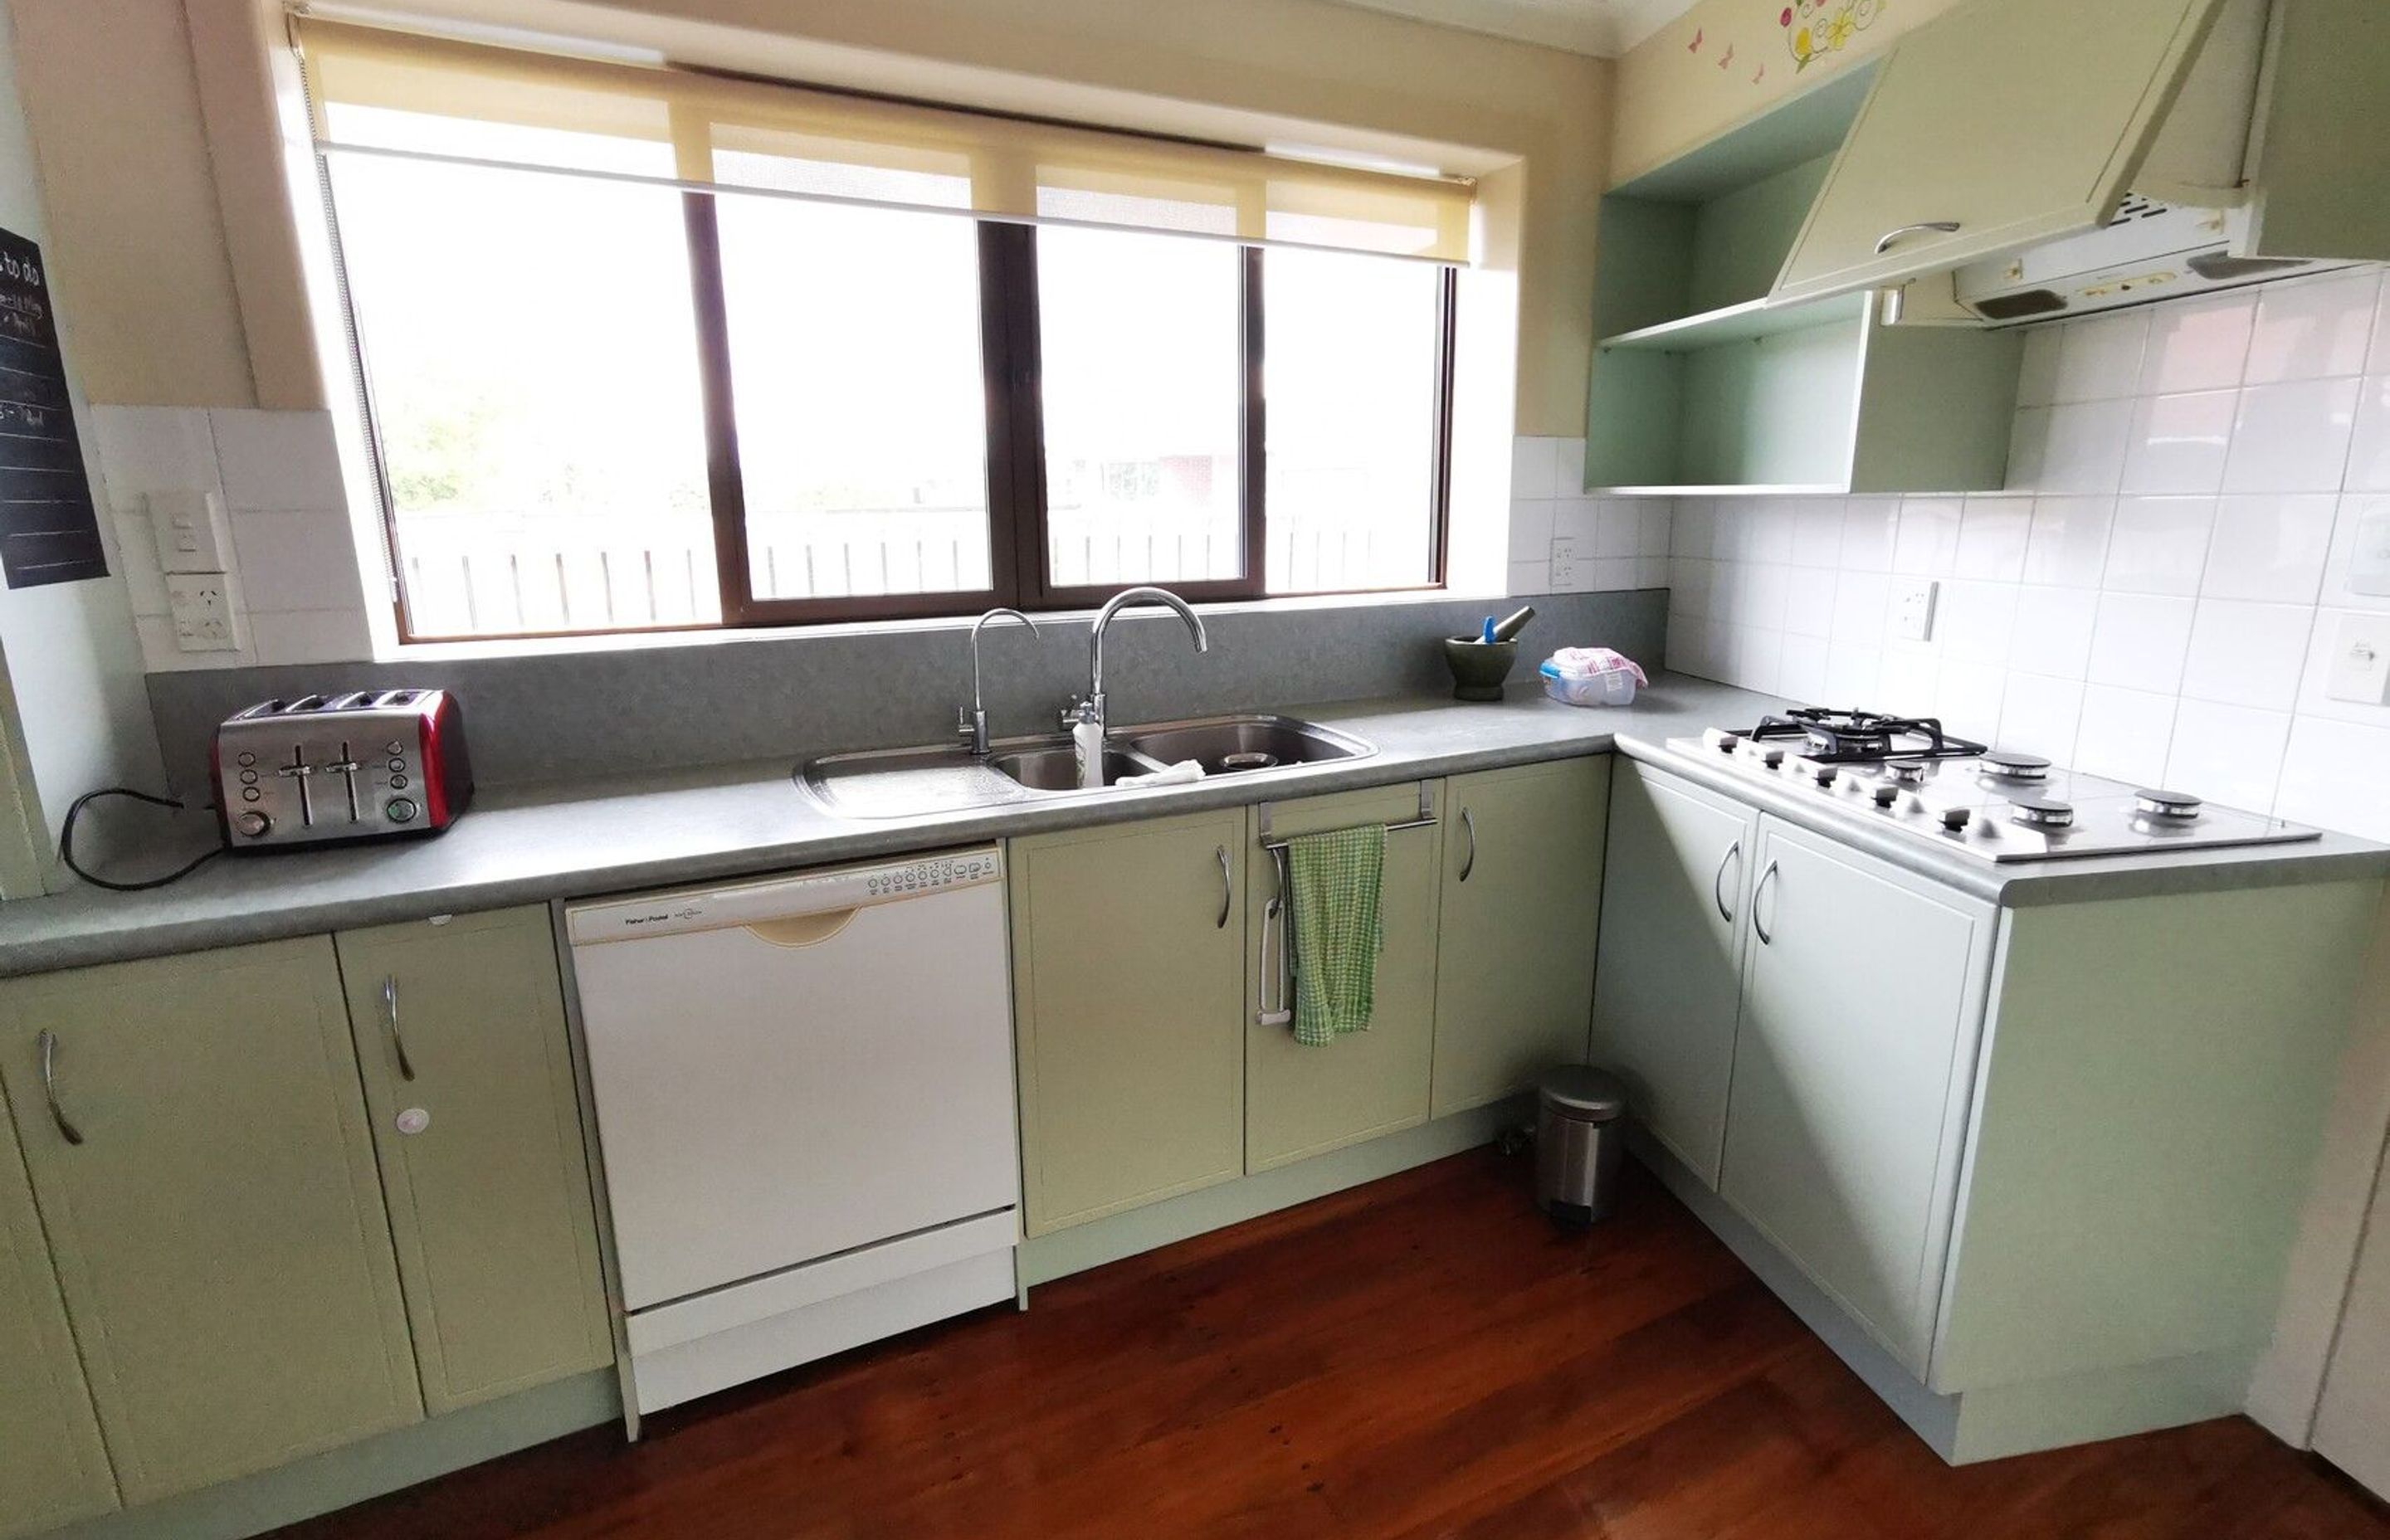 New Kitchen Remodel Cost In Nz